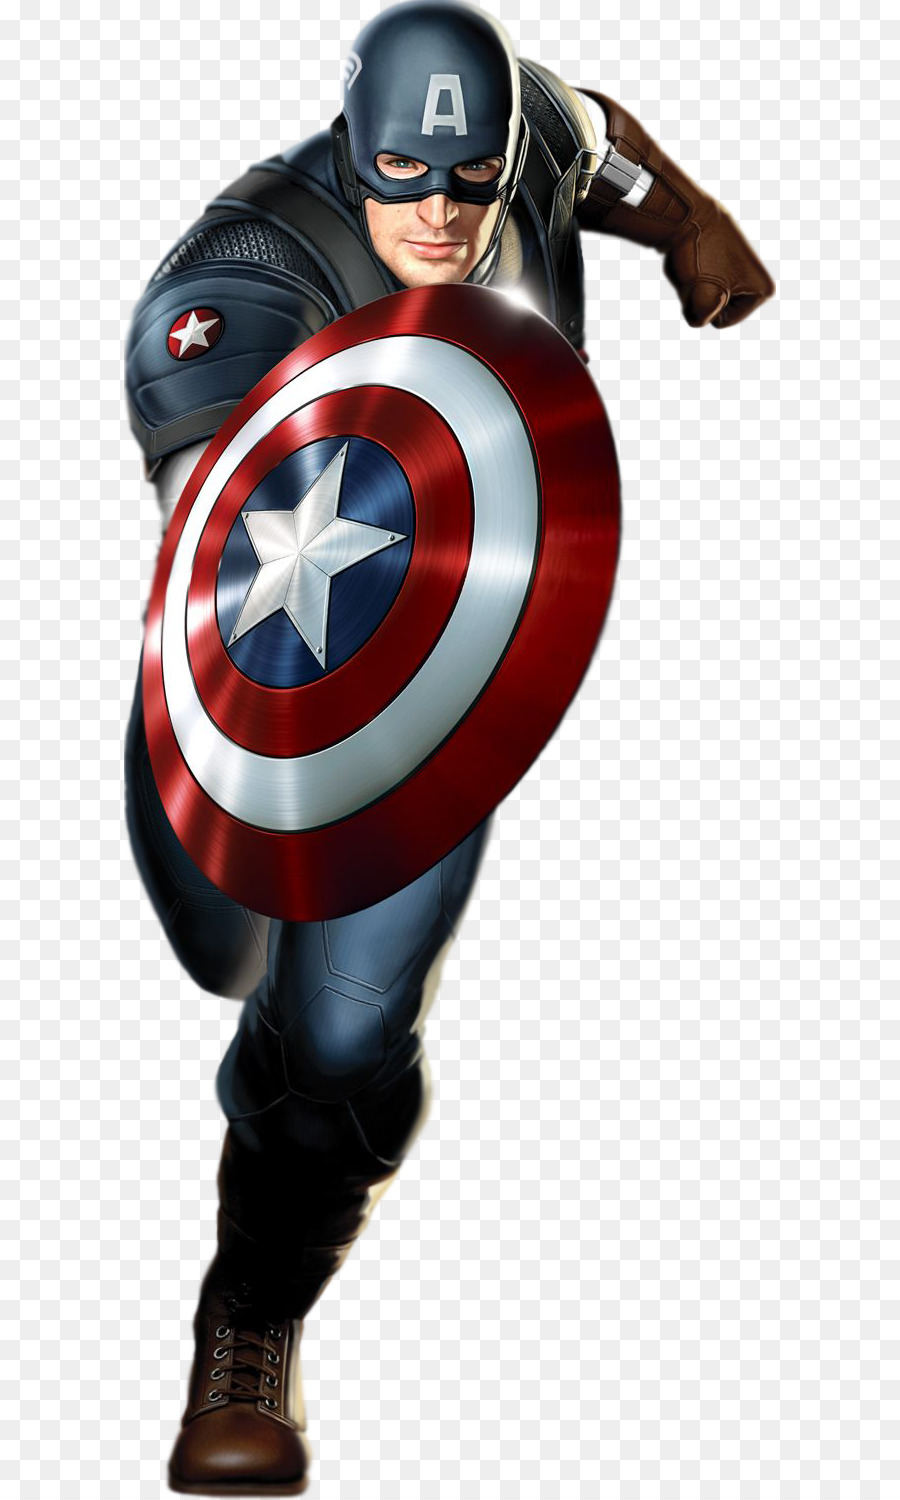 Captain America The Avengers Bedroom - America png download - 652*1500 - Free Transparent Captain America png Download.